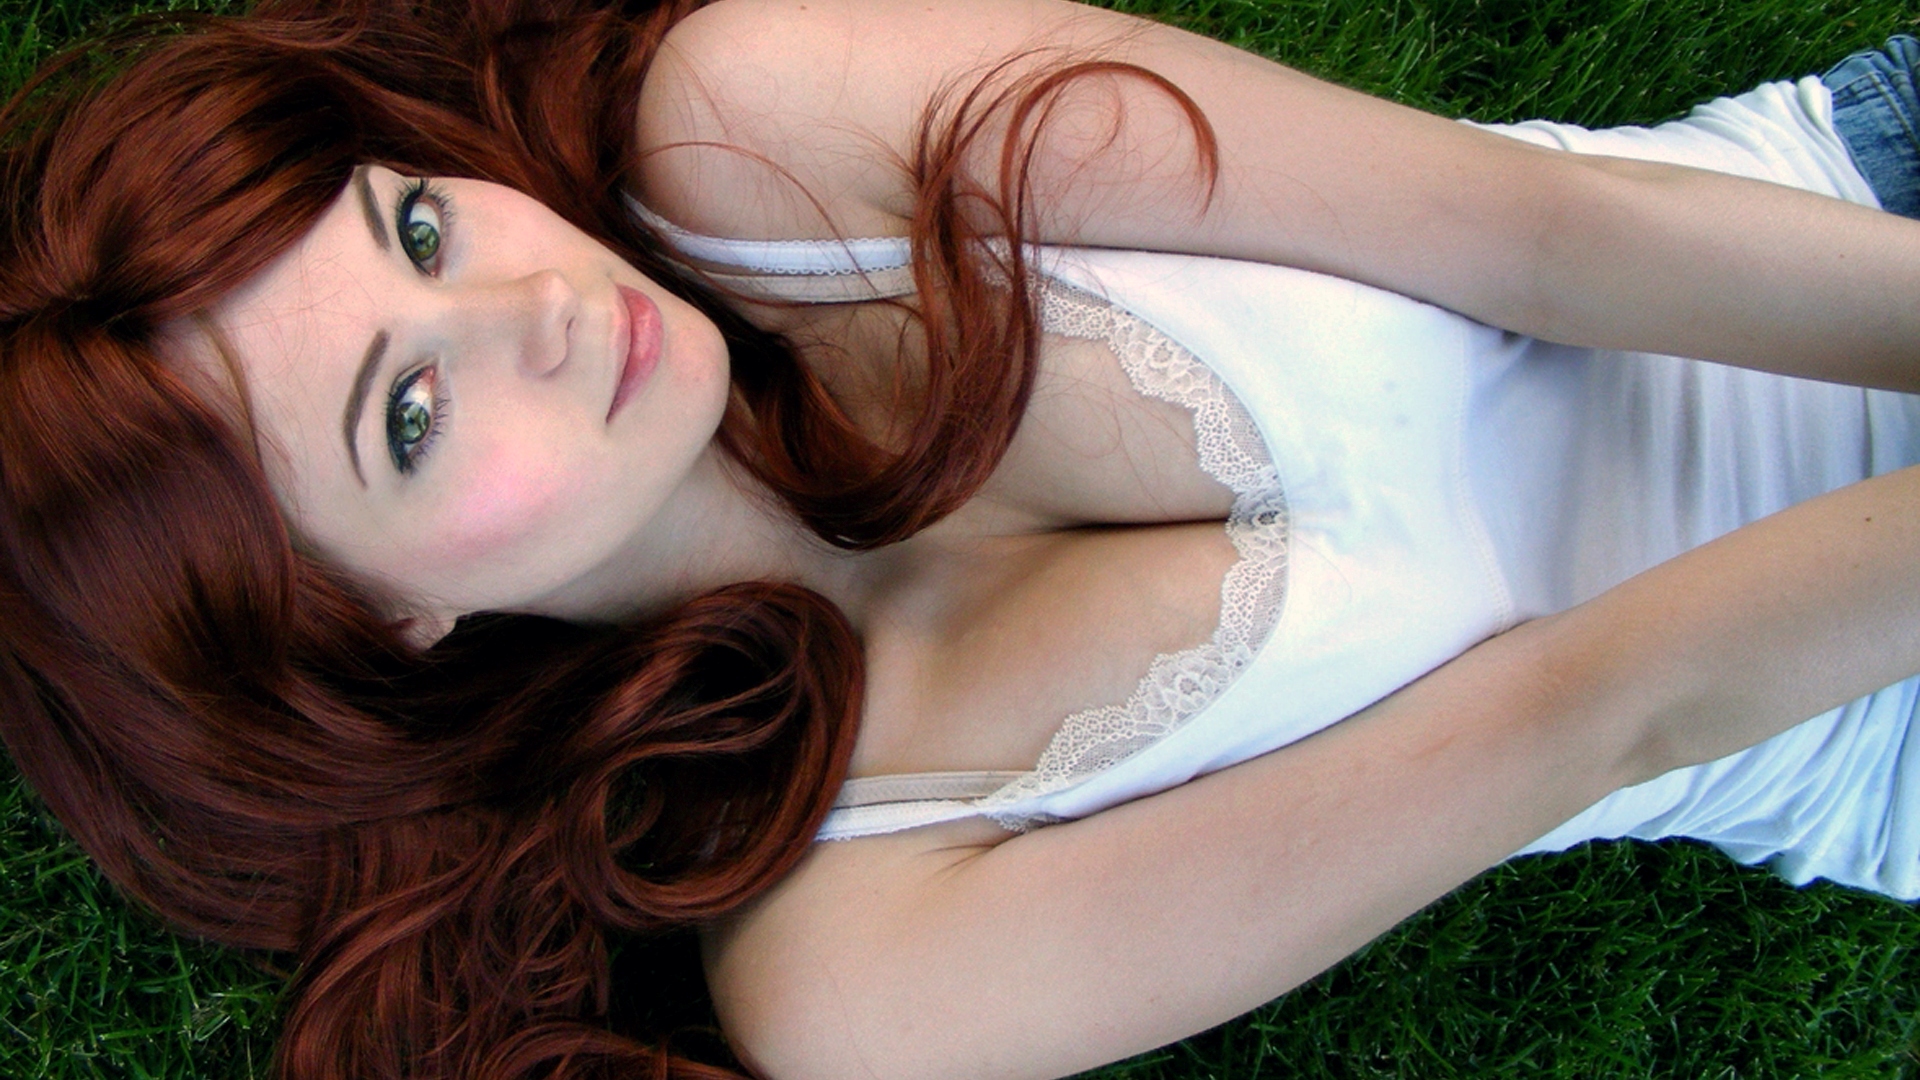 People 1920x1080 redhead green eyes women cleavage model face women outdoors dyed hair looking up grass outdoors lying on back smiling